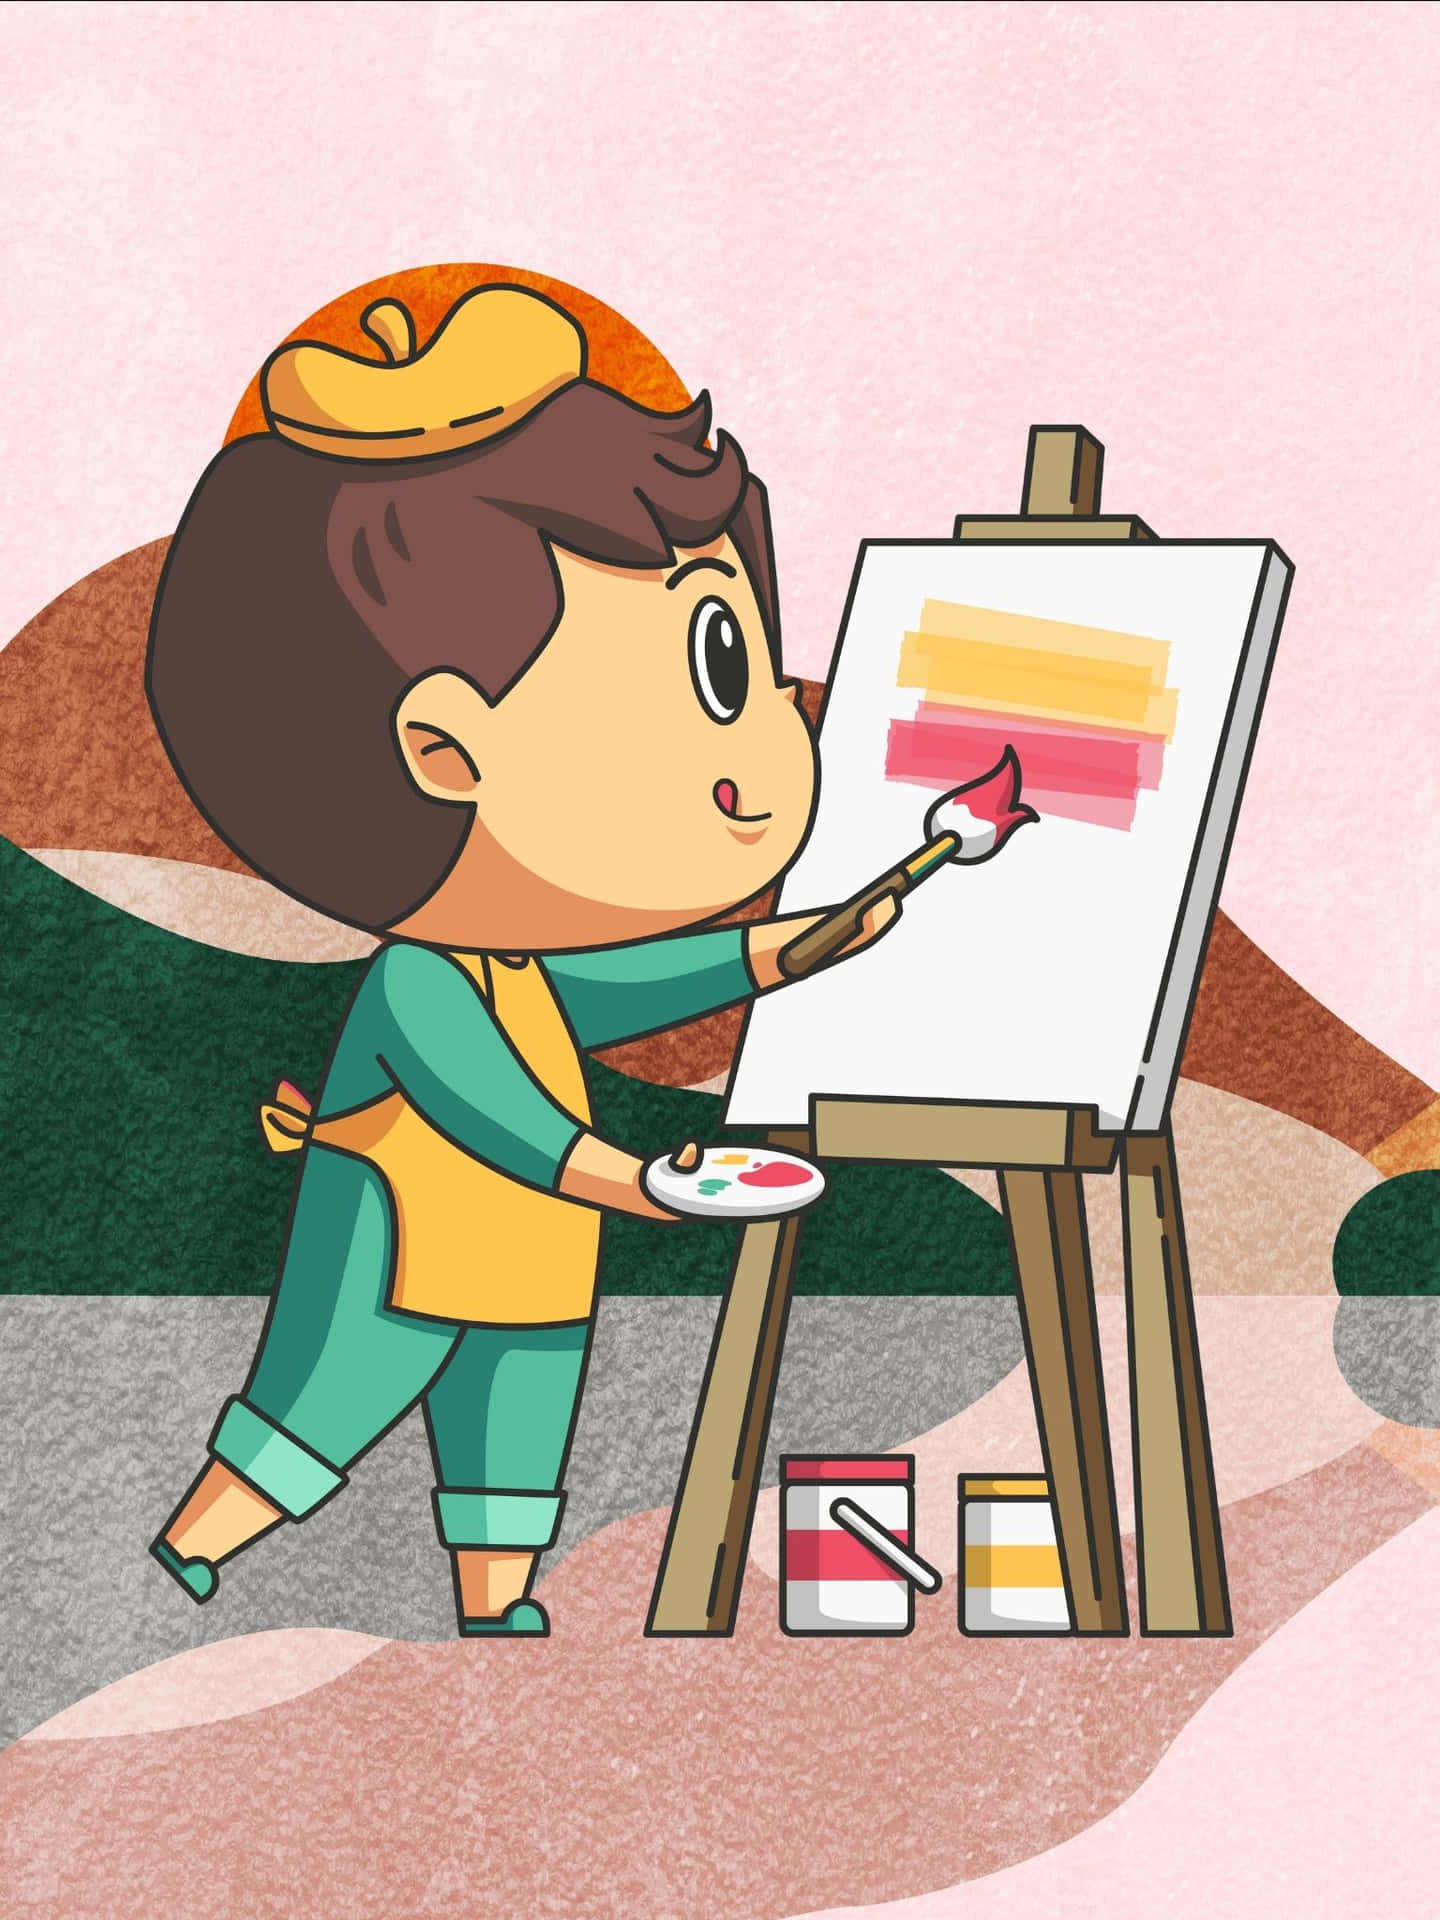 A Cartoon Illustration Of A Girl Painting On An Easel